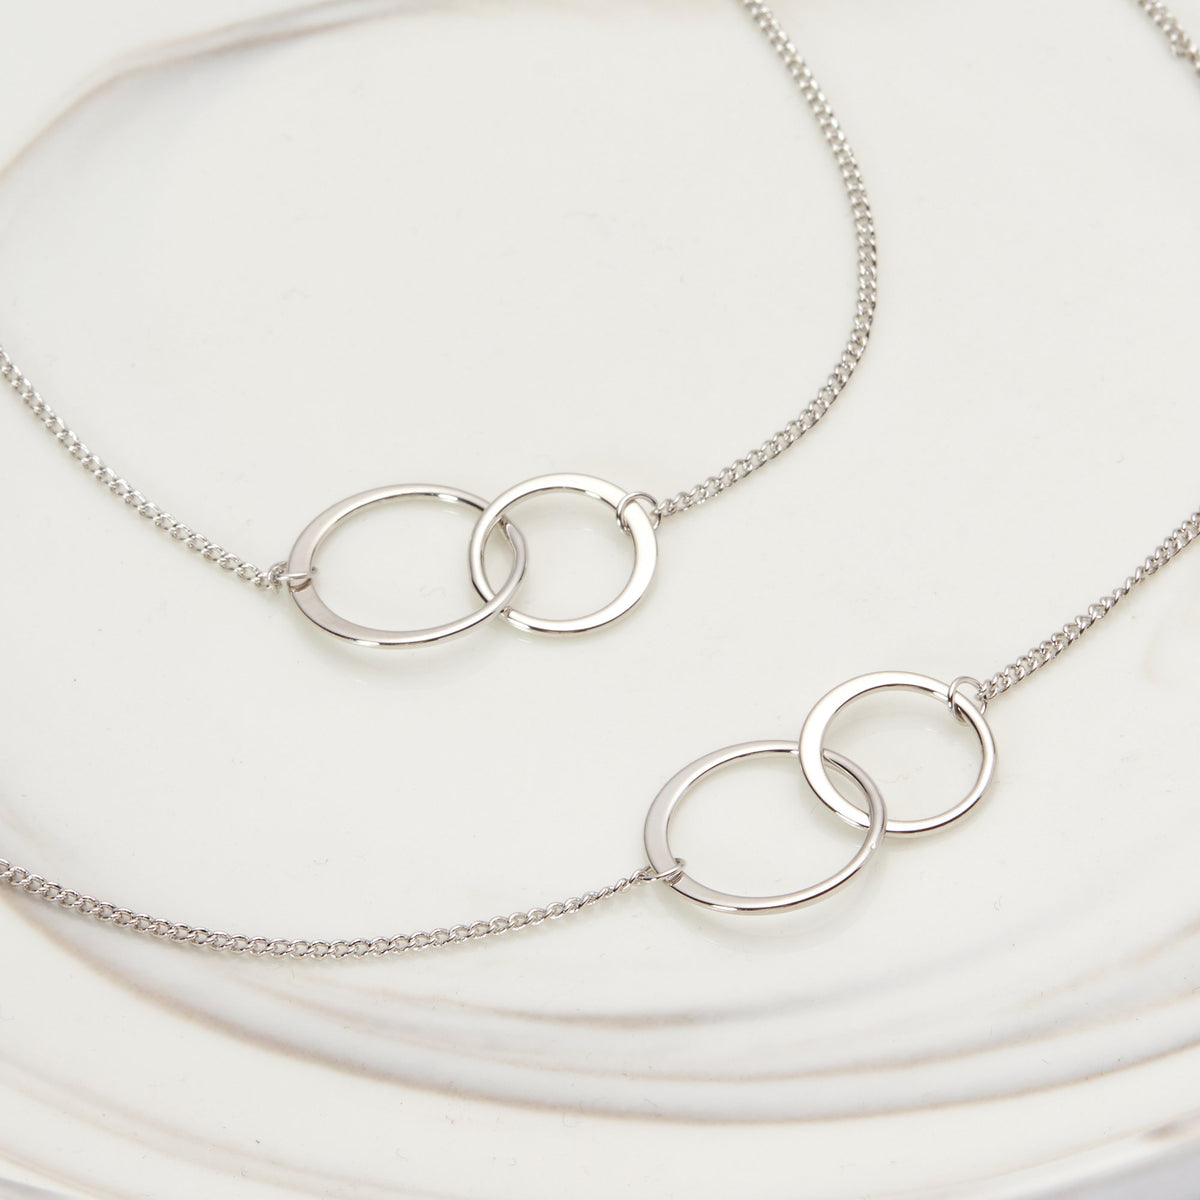 Besties Christmas Double Circles Necklace Set